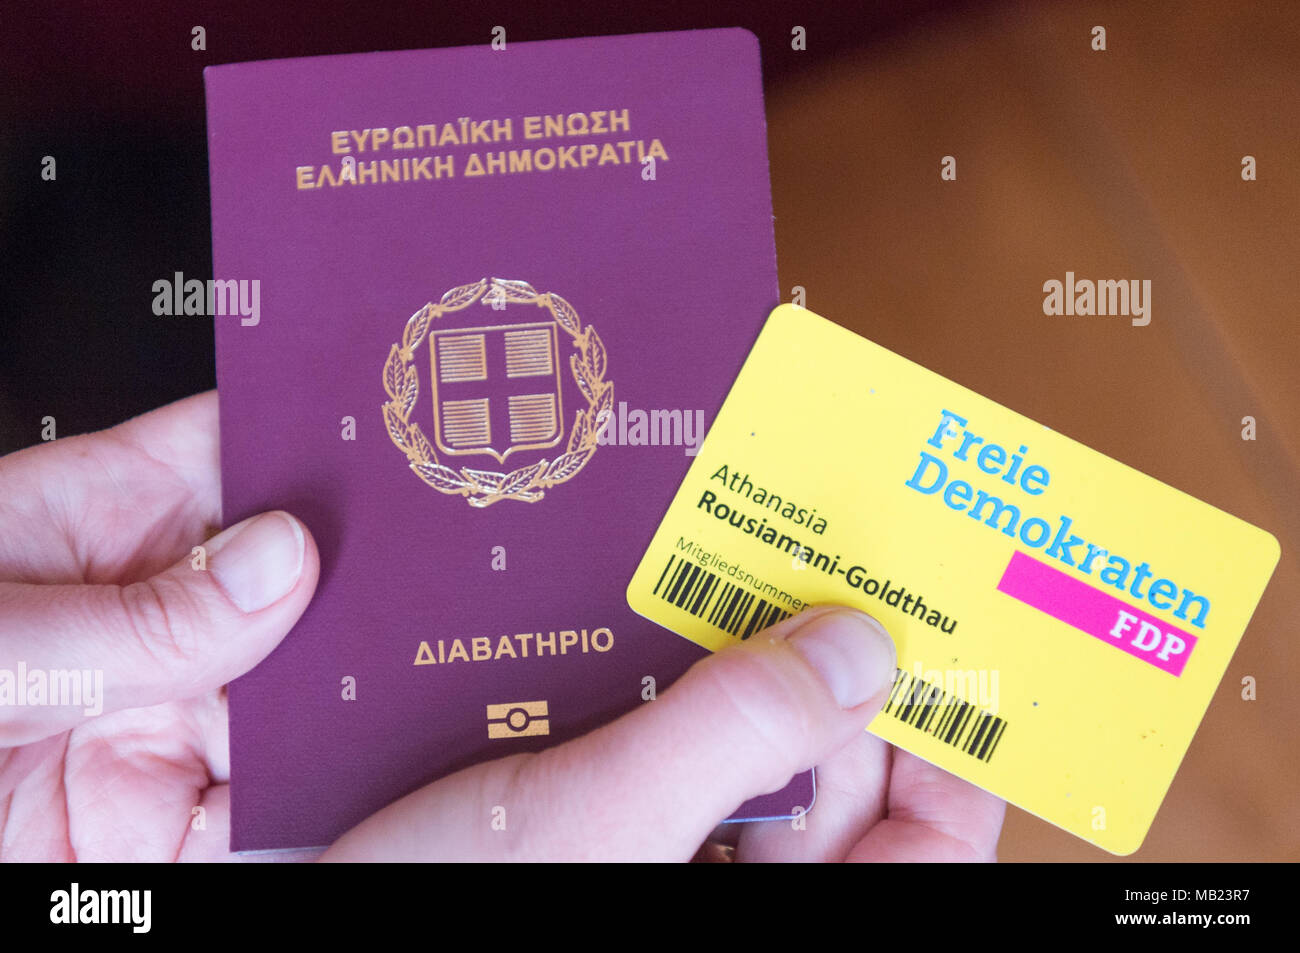 20 March 2018, Germany, Berlin: Athanasia Rousiamani-Goldthau of the Free Democratic Party (FDP), a politican from Greece, holds up her Greek passport and her FDP member's card. She joined the German FDP in her youth despite only having a Greek passport. Photo: Christophe Gateau/dpa Stock Photo